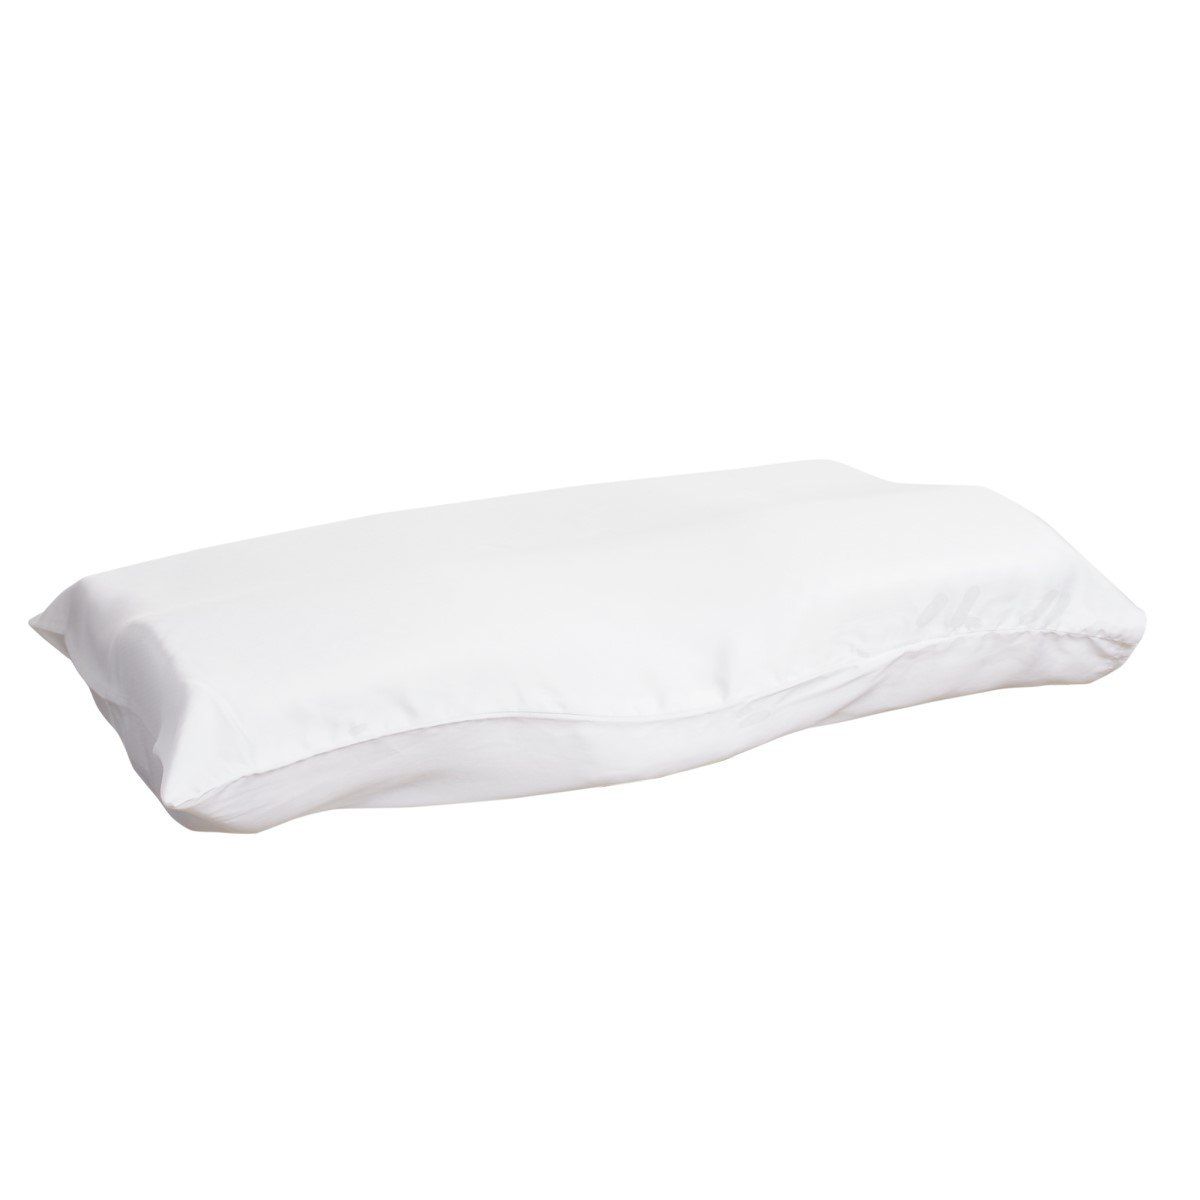 Groove cooling tencel pillowcase